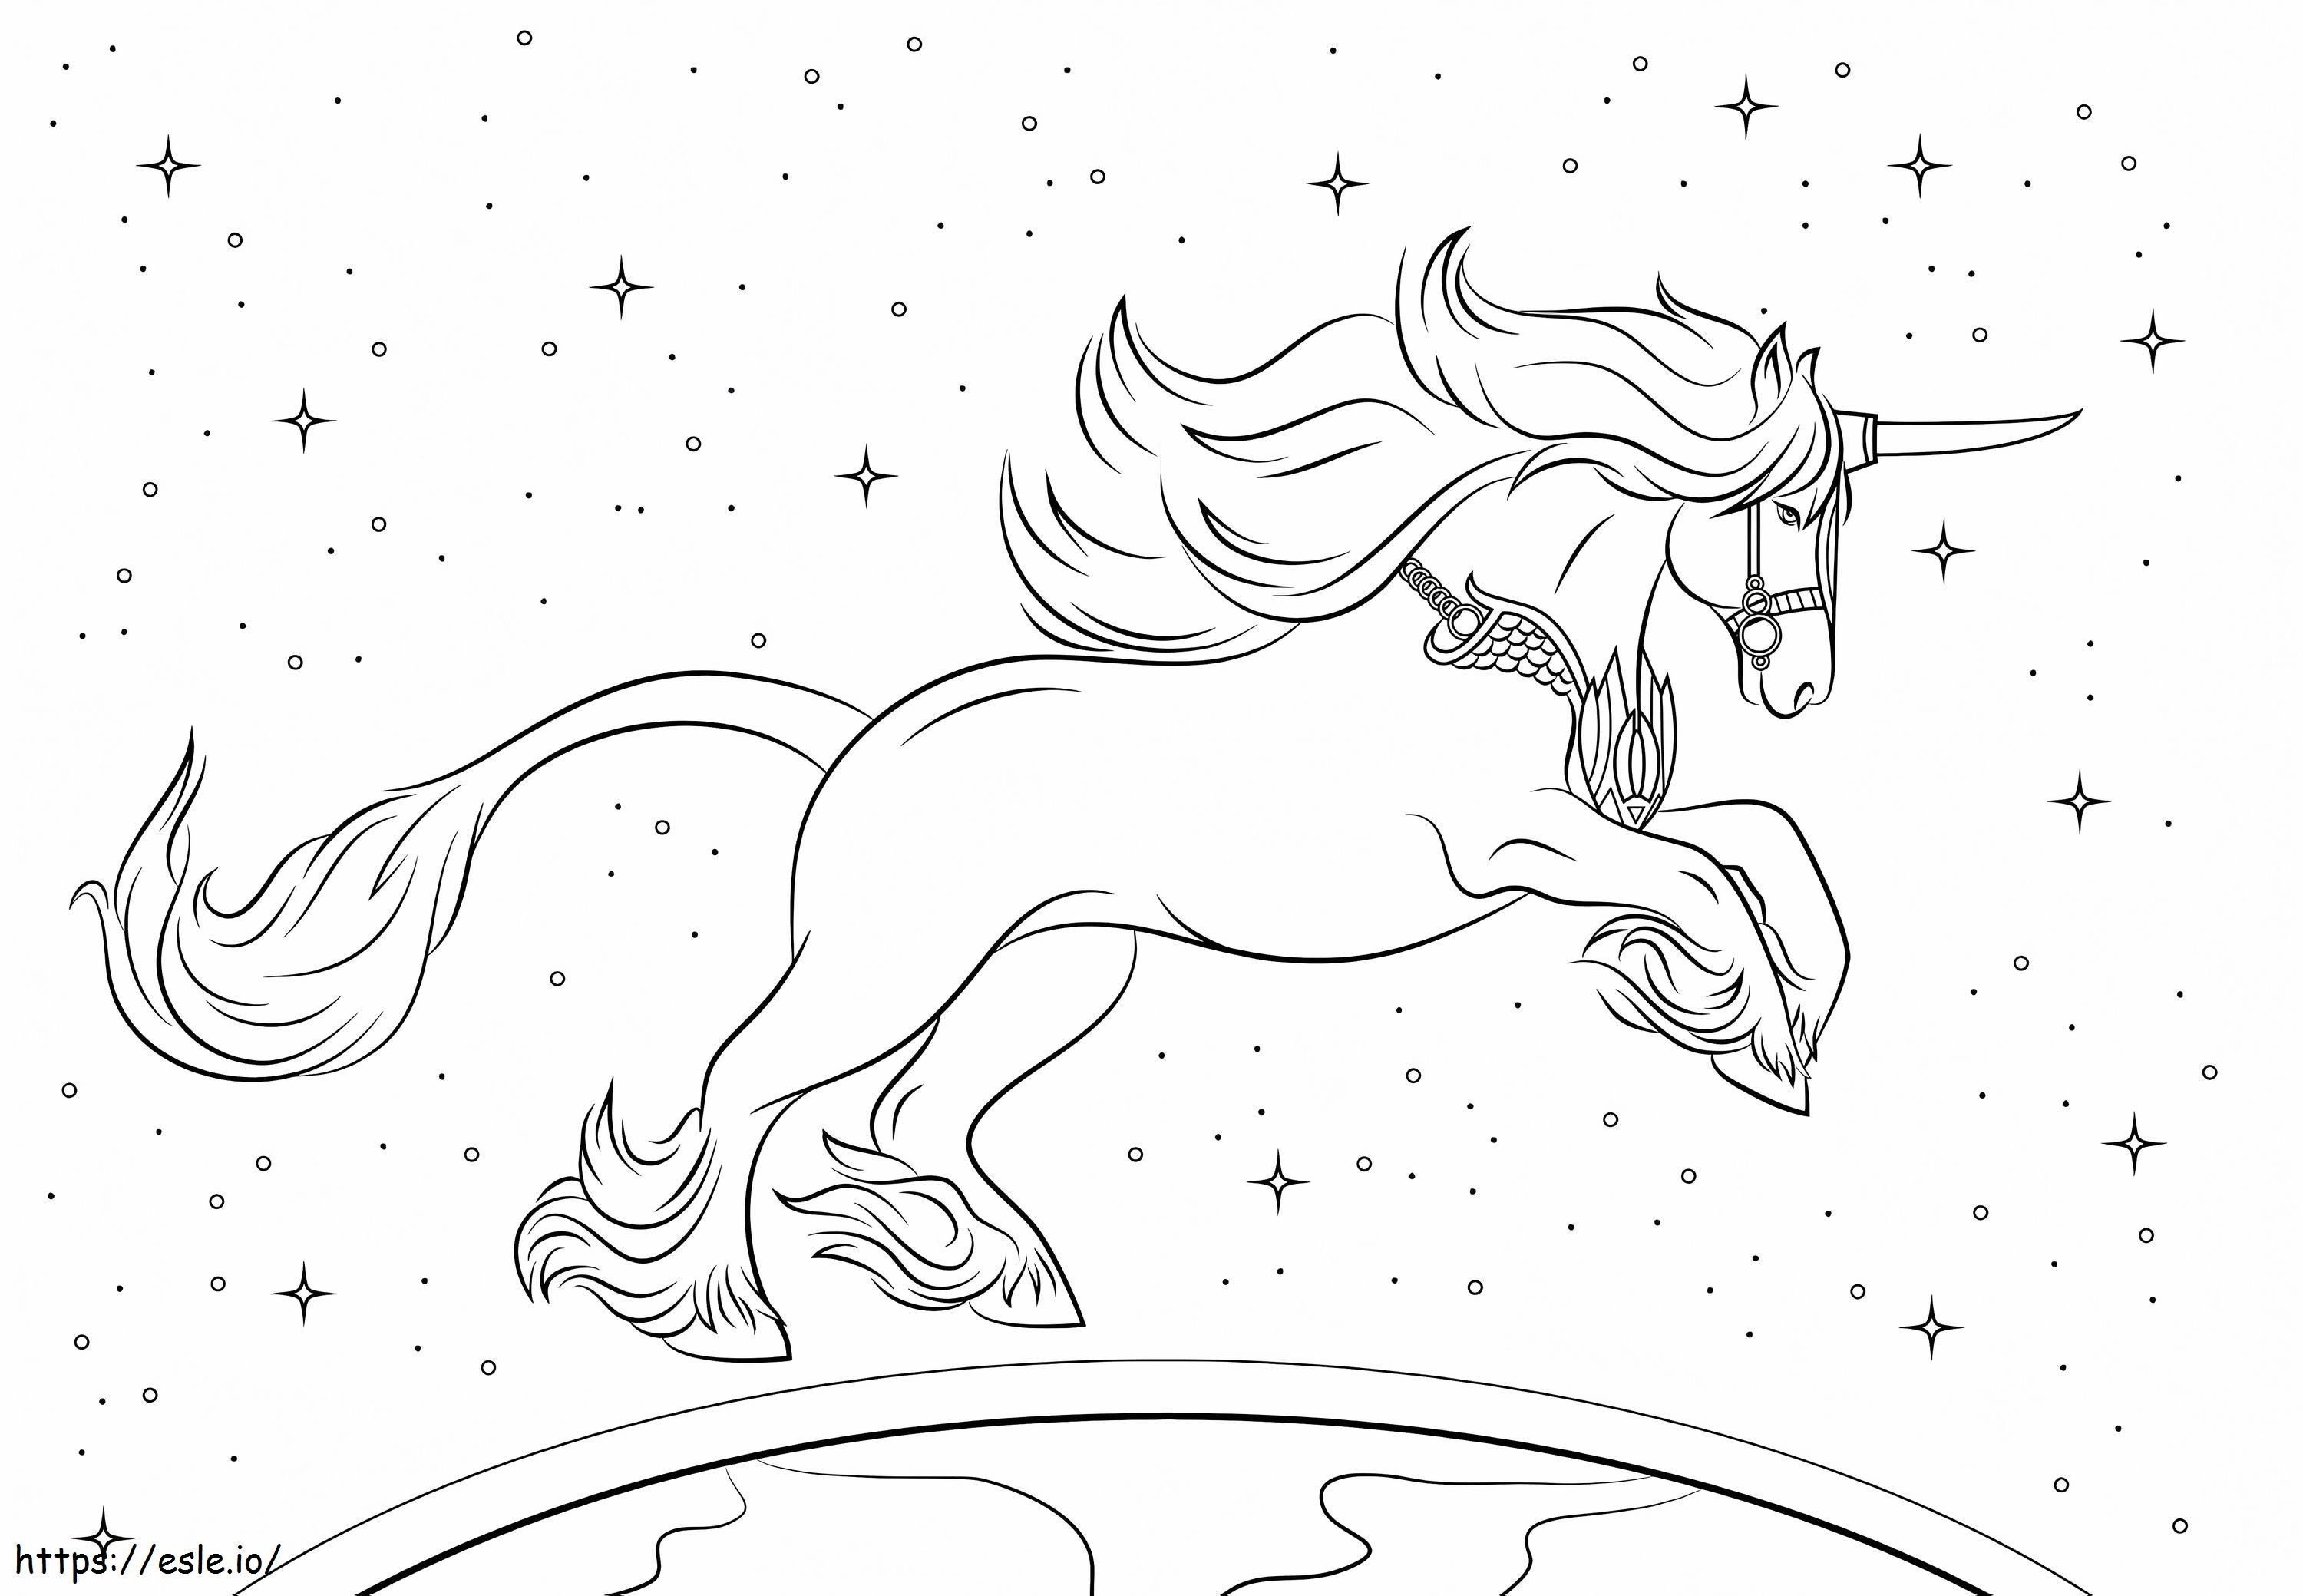 Moving Unicorn coloring page